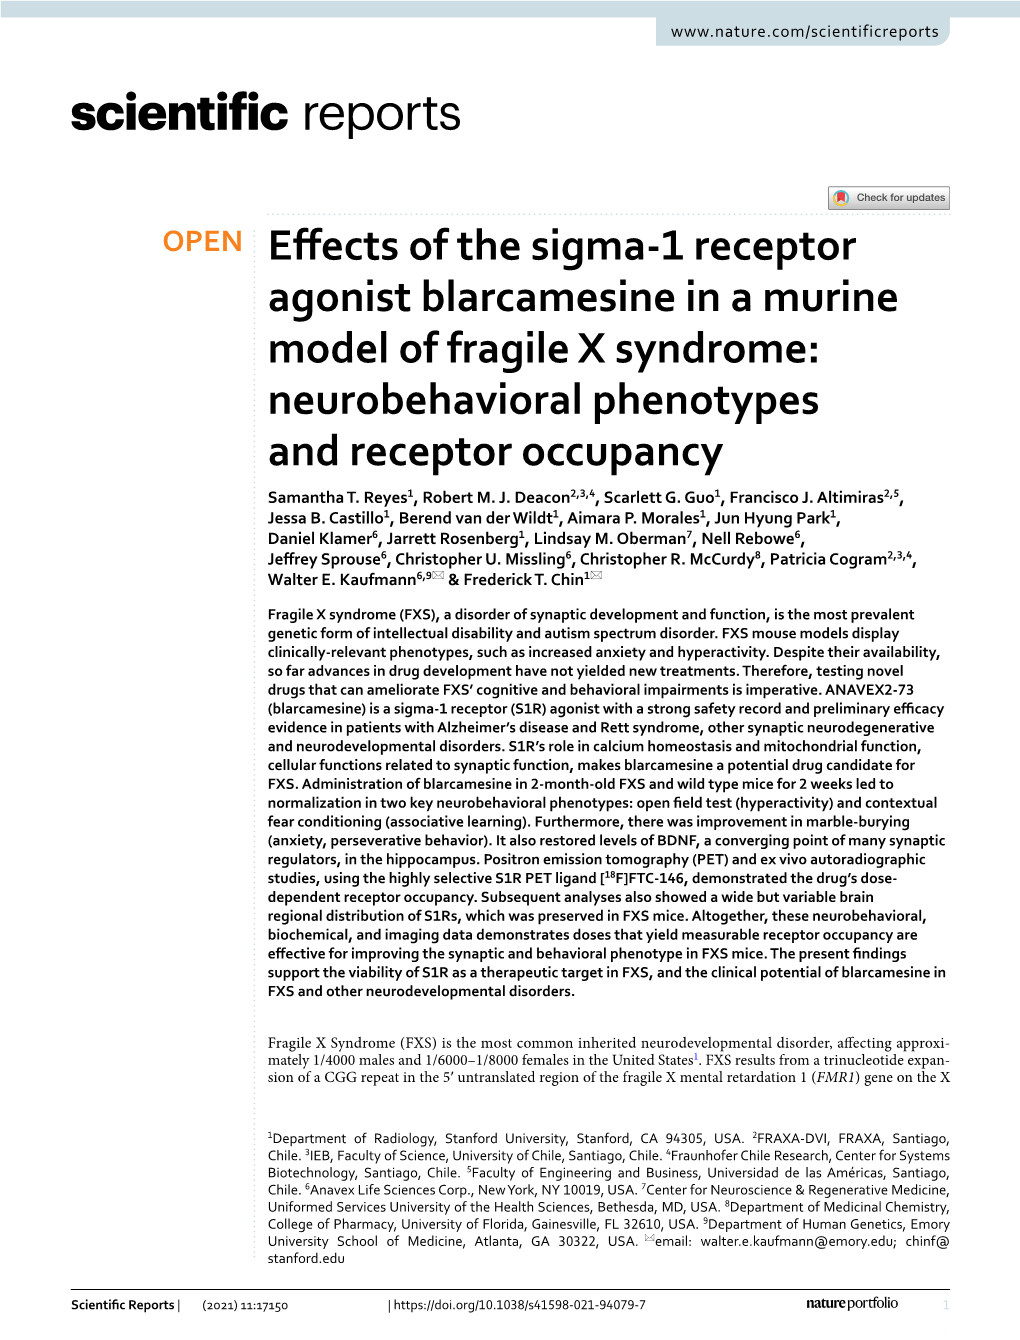 Effects of the Sigma-1 Receptor Agonist Blarcamesine in a Murine Model Of